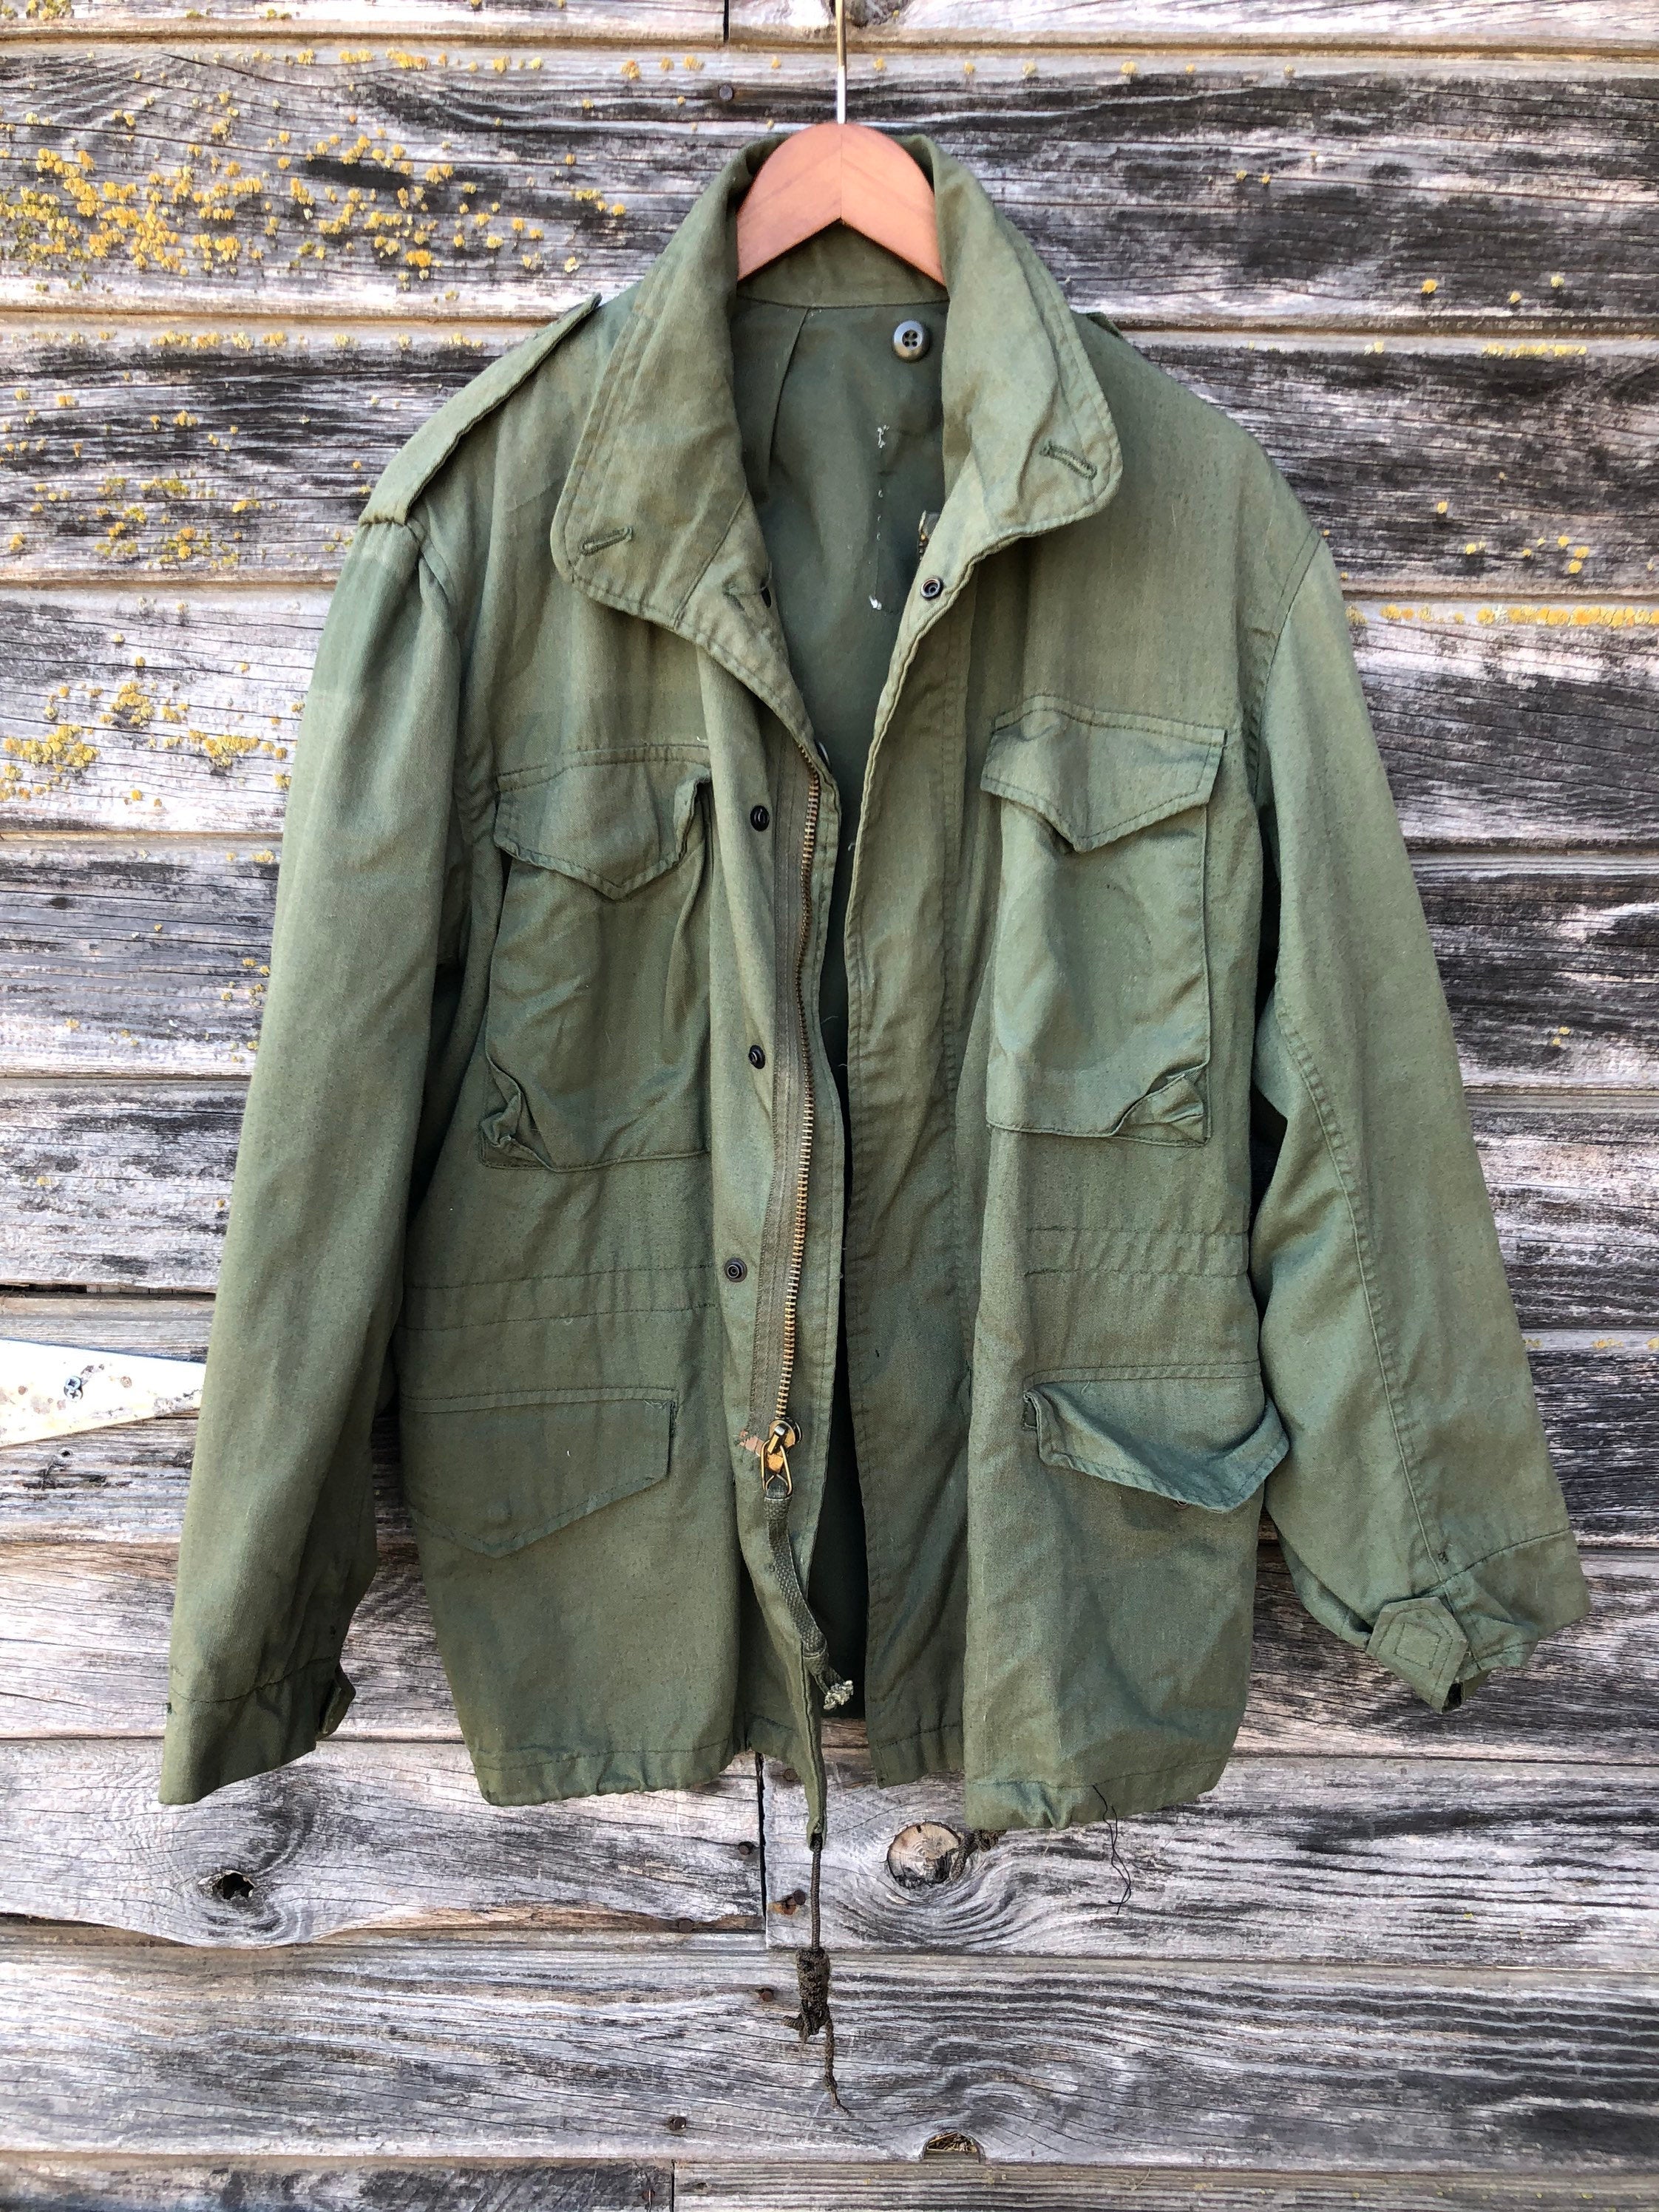 Vintage US Army Olive Green Military Jacket | Shop THRILLING